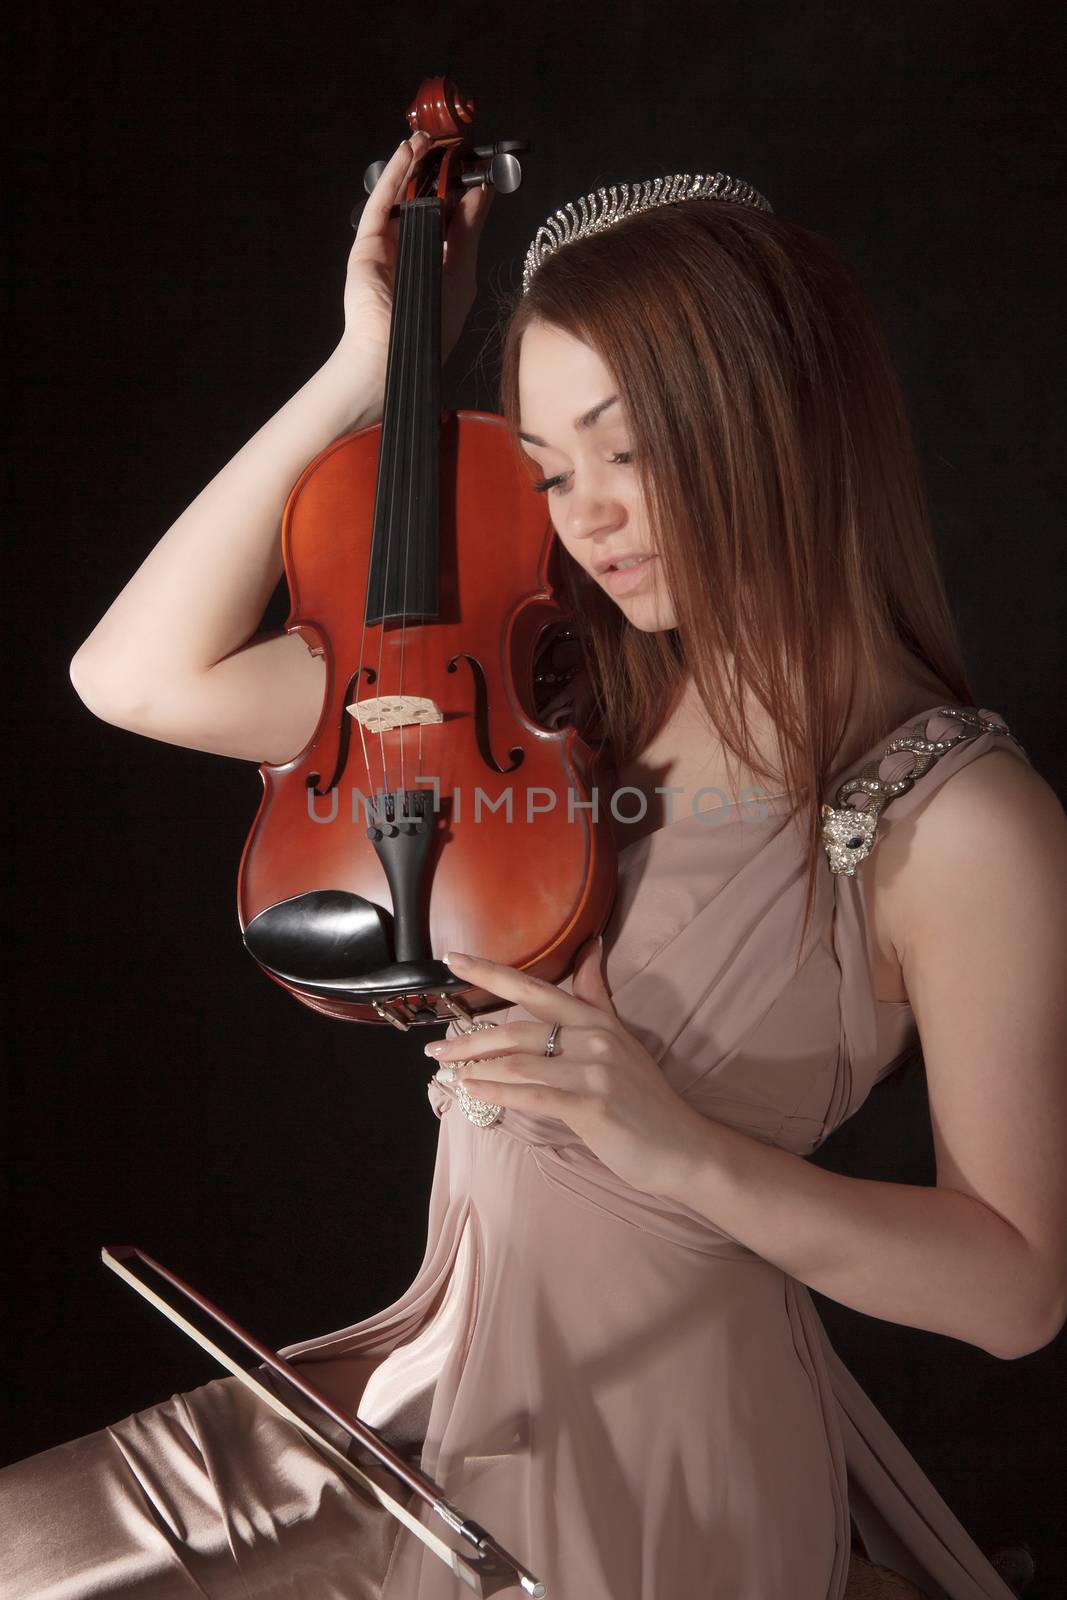 Pretty young woman holding a violin by Artzzz